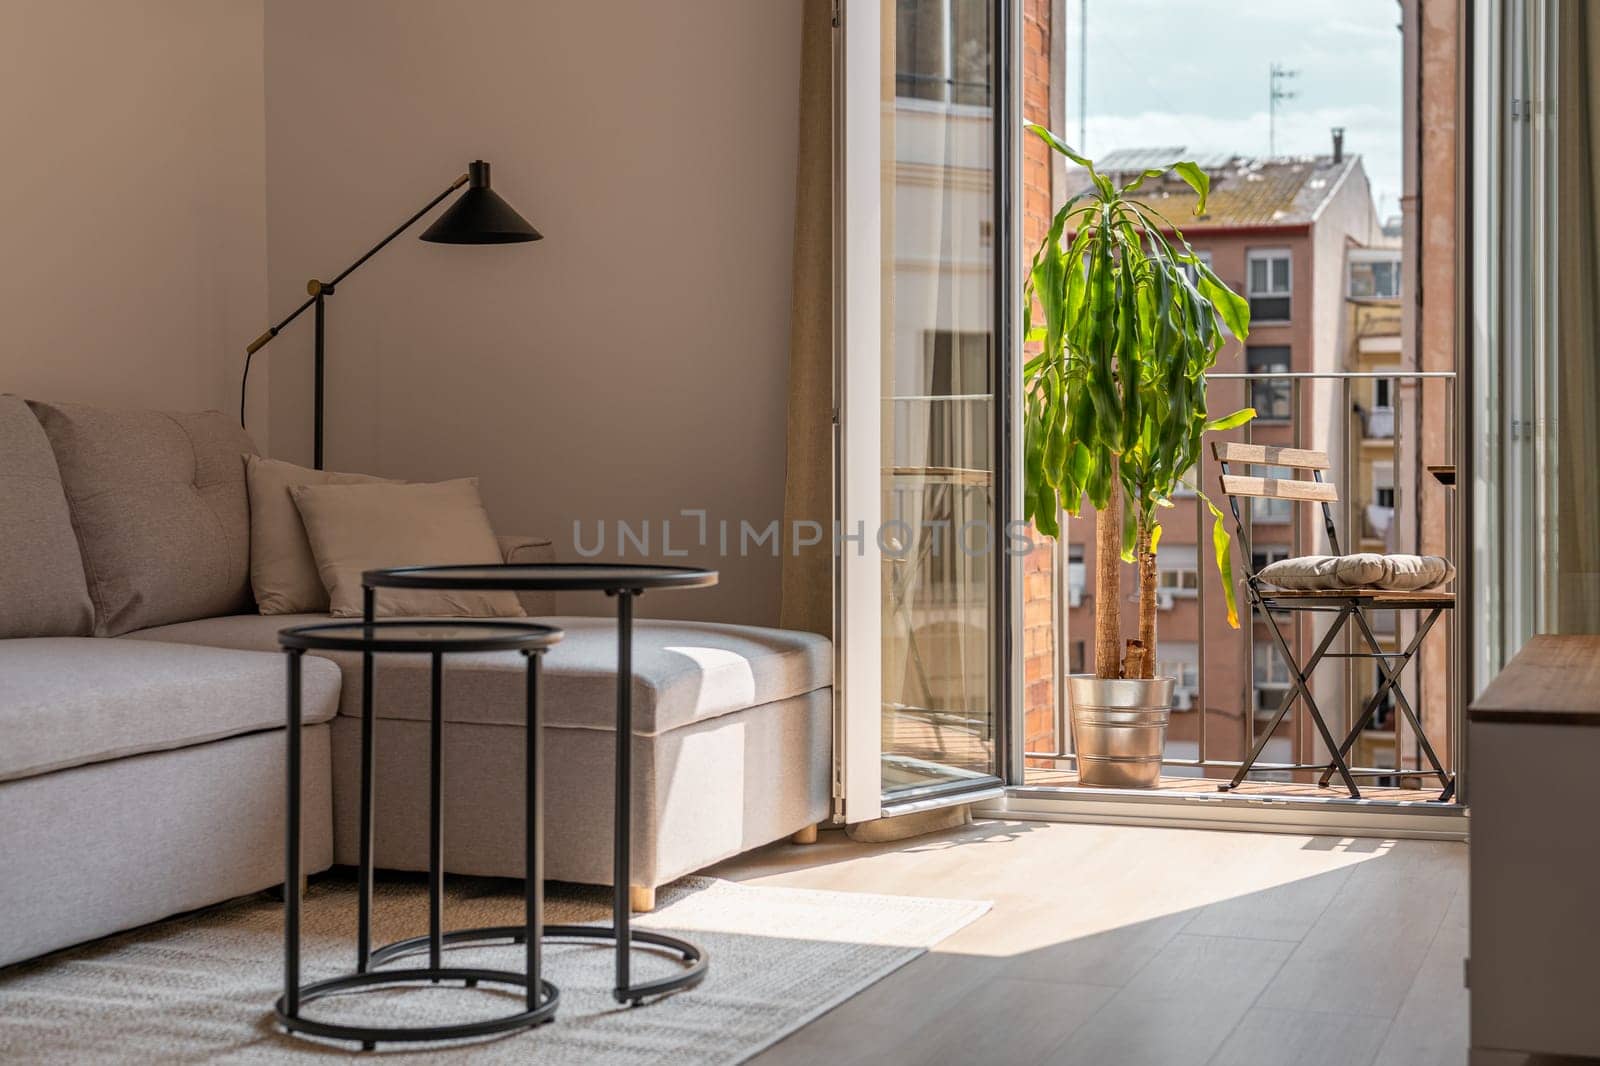 Shady living room and open balcony door in studio apartment on sunny day. Residential house interior with stylish furniture in Barcelona